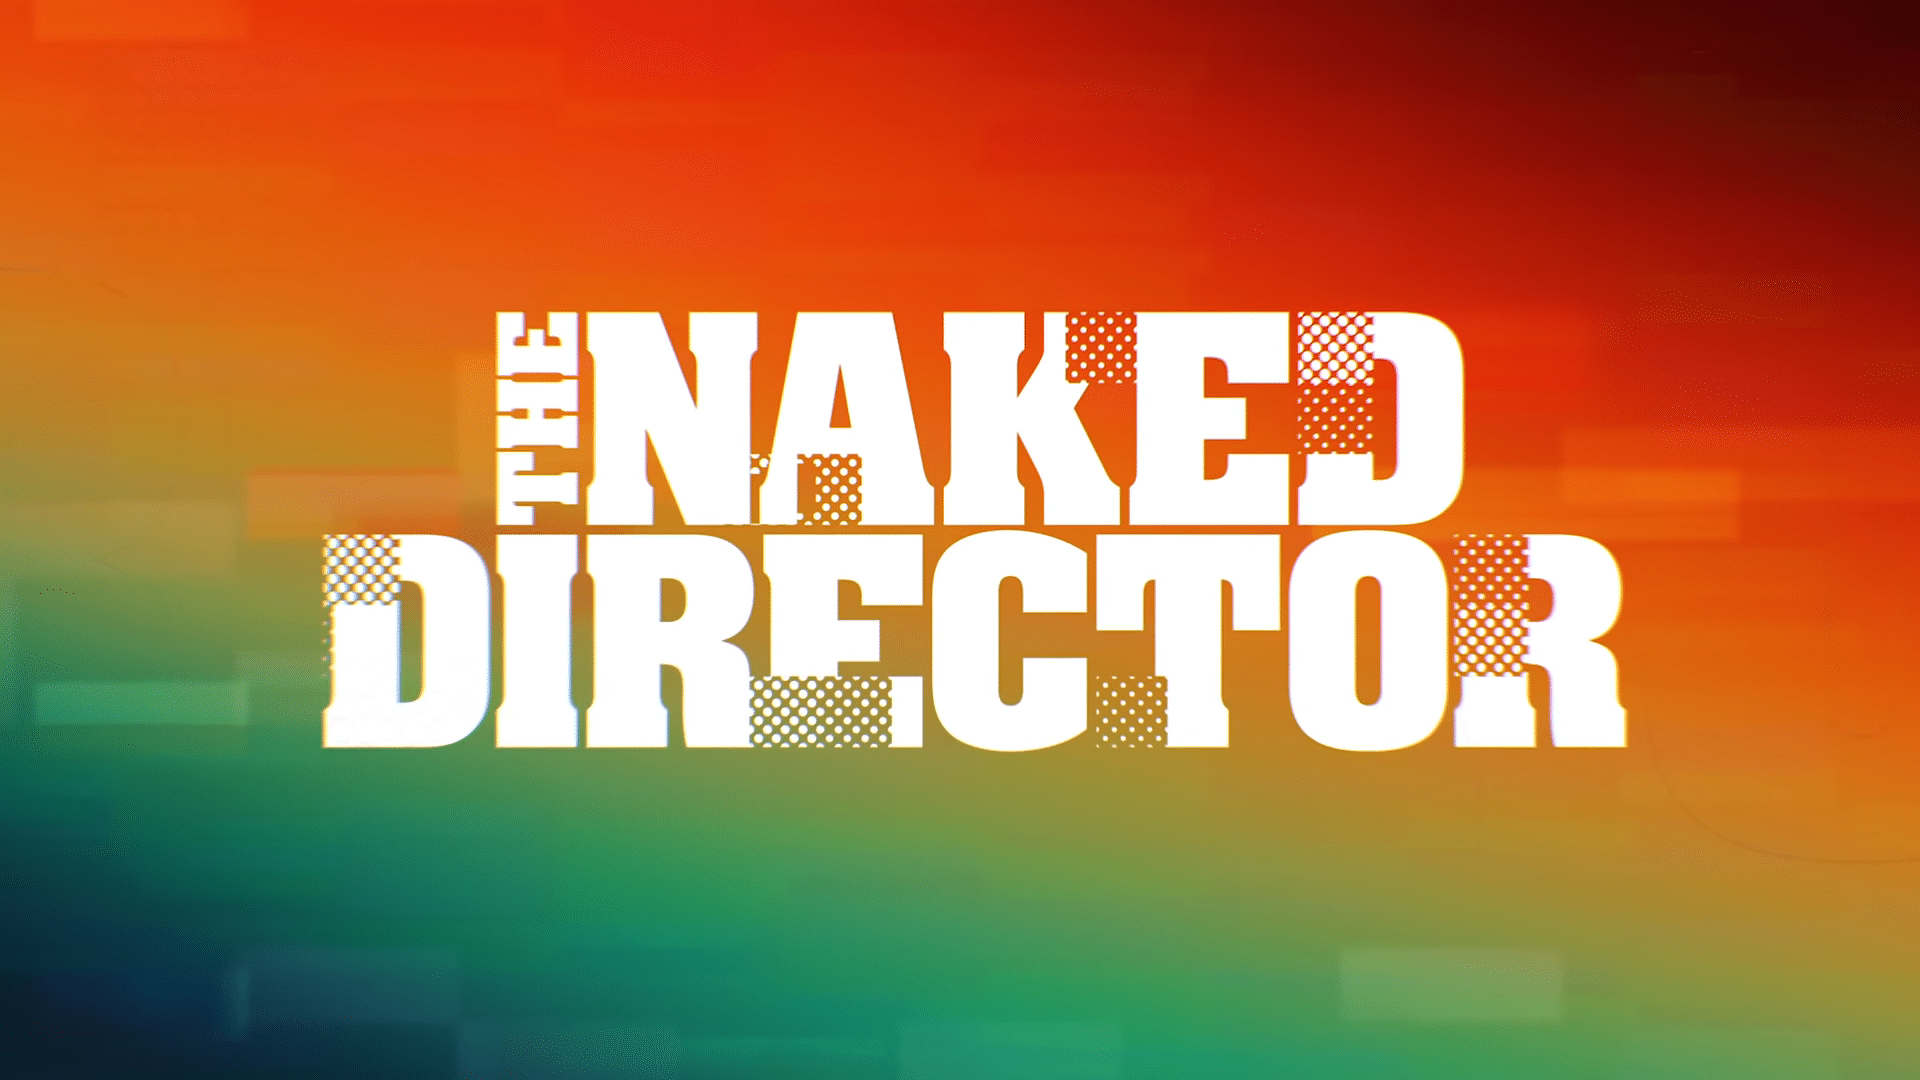 The Naked Director Netflix Trailer, Netflix Documentaries, Netflix Dramas, What's Coming to Netflix, Coming to Netflix in August